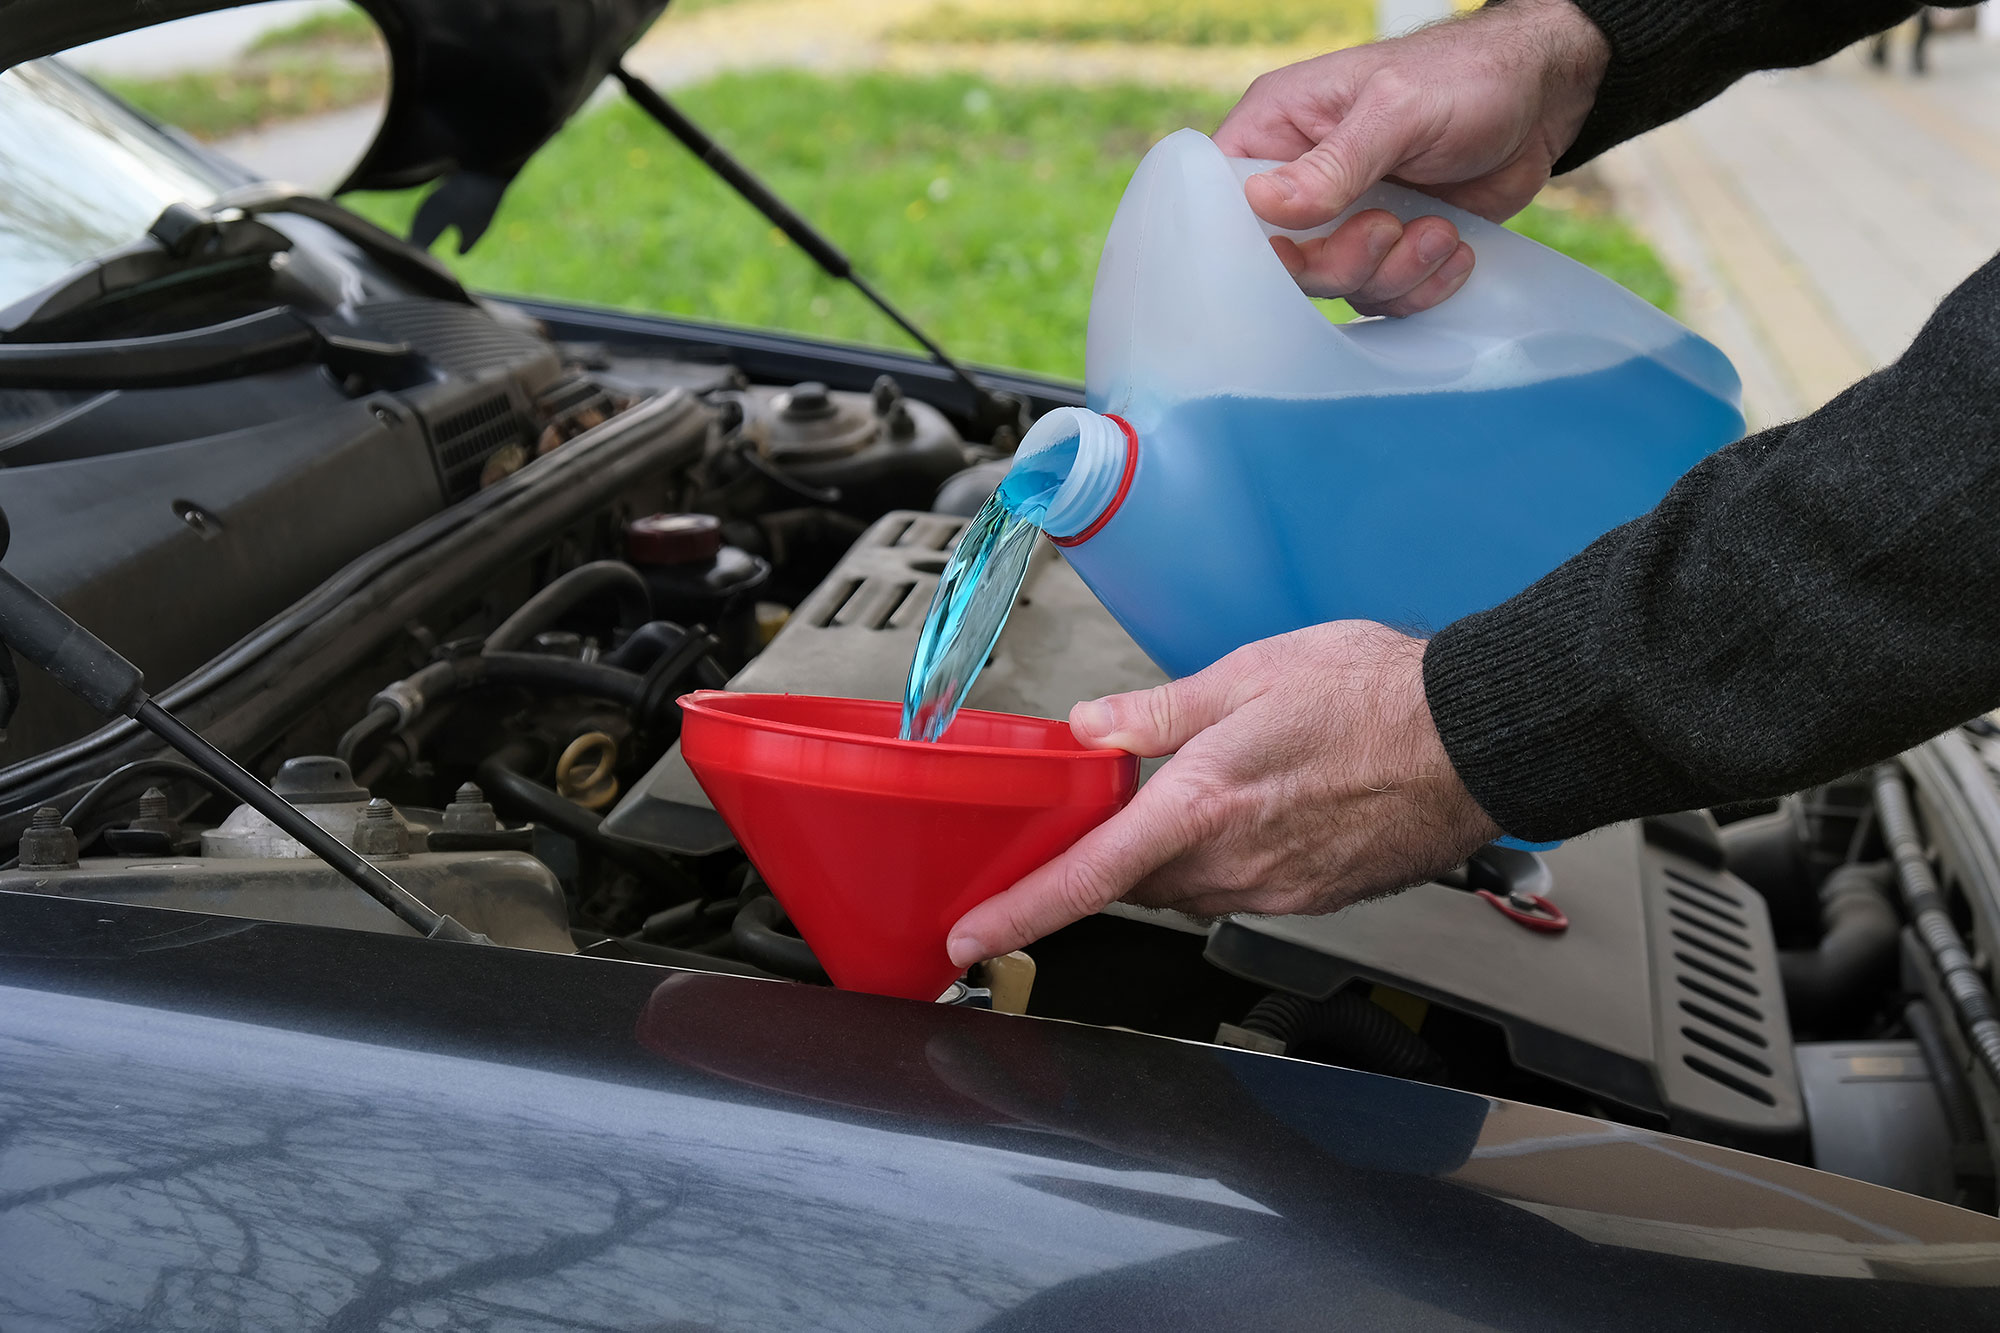 Windshield De-icer vs Wiper Fluid: What's the Difference? 